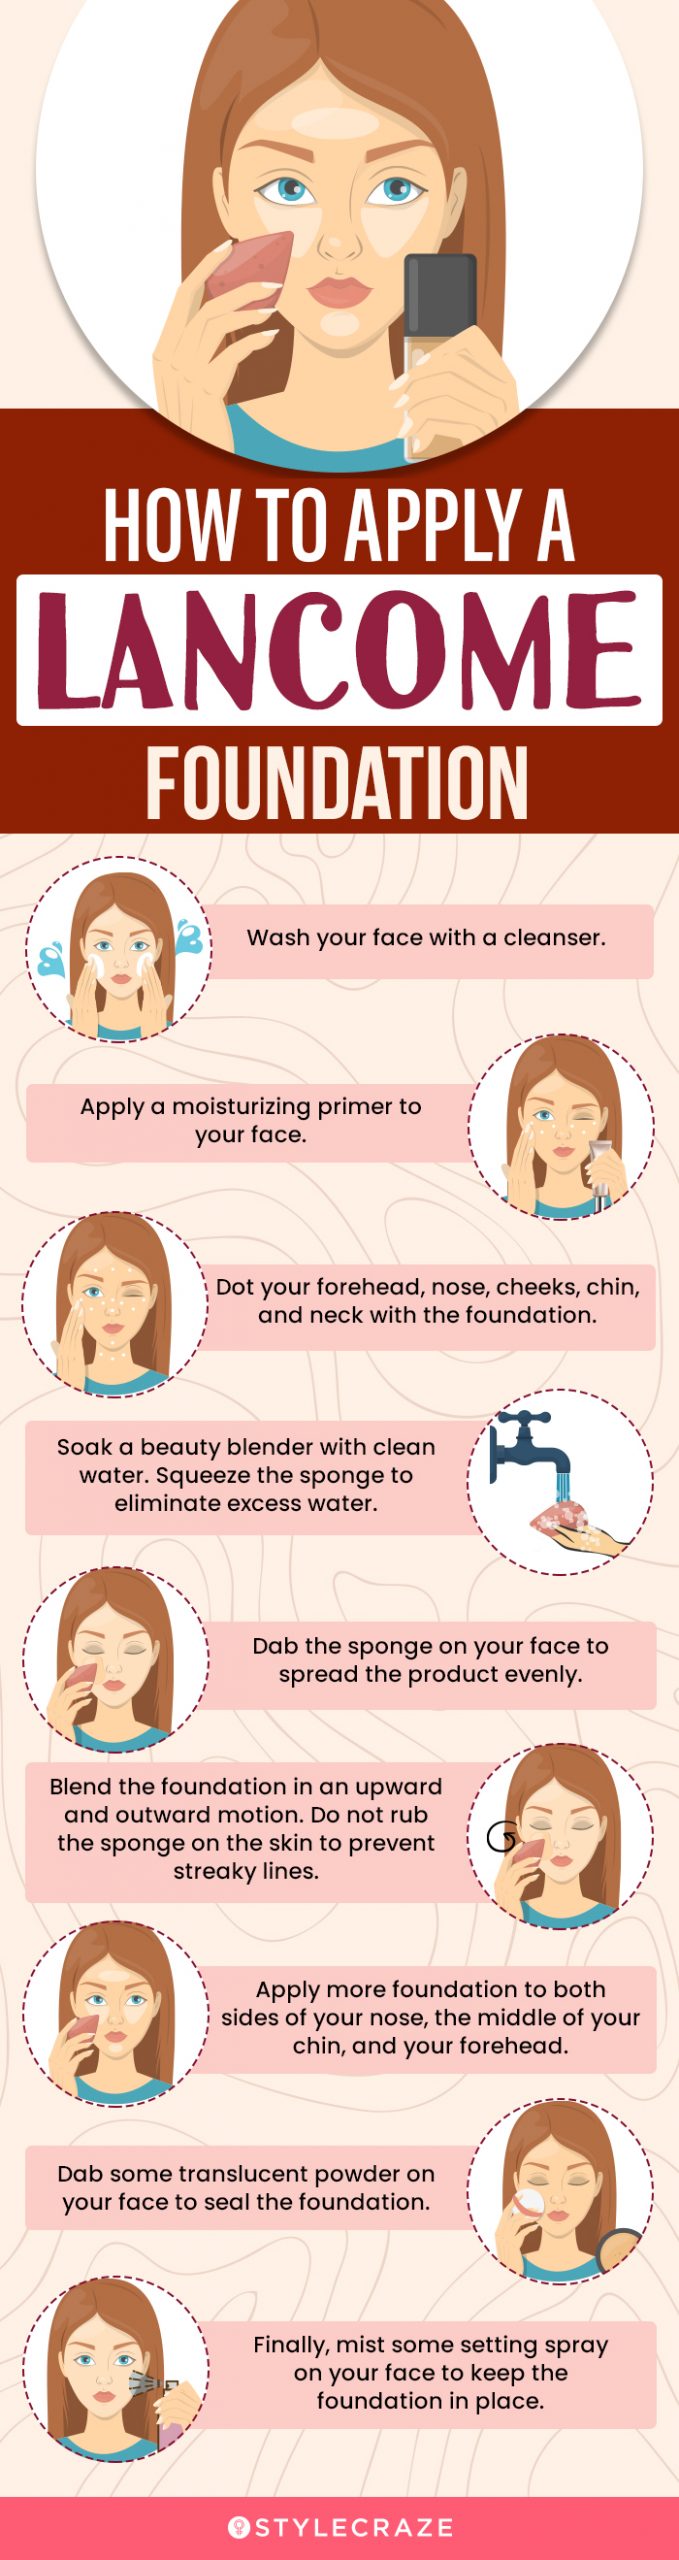 How To Apply A Lancome Foundation (infographic)